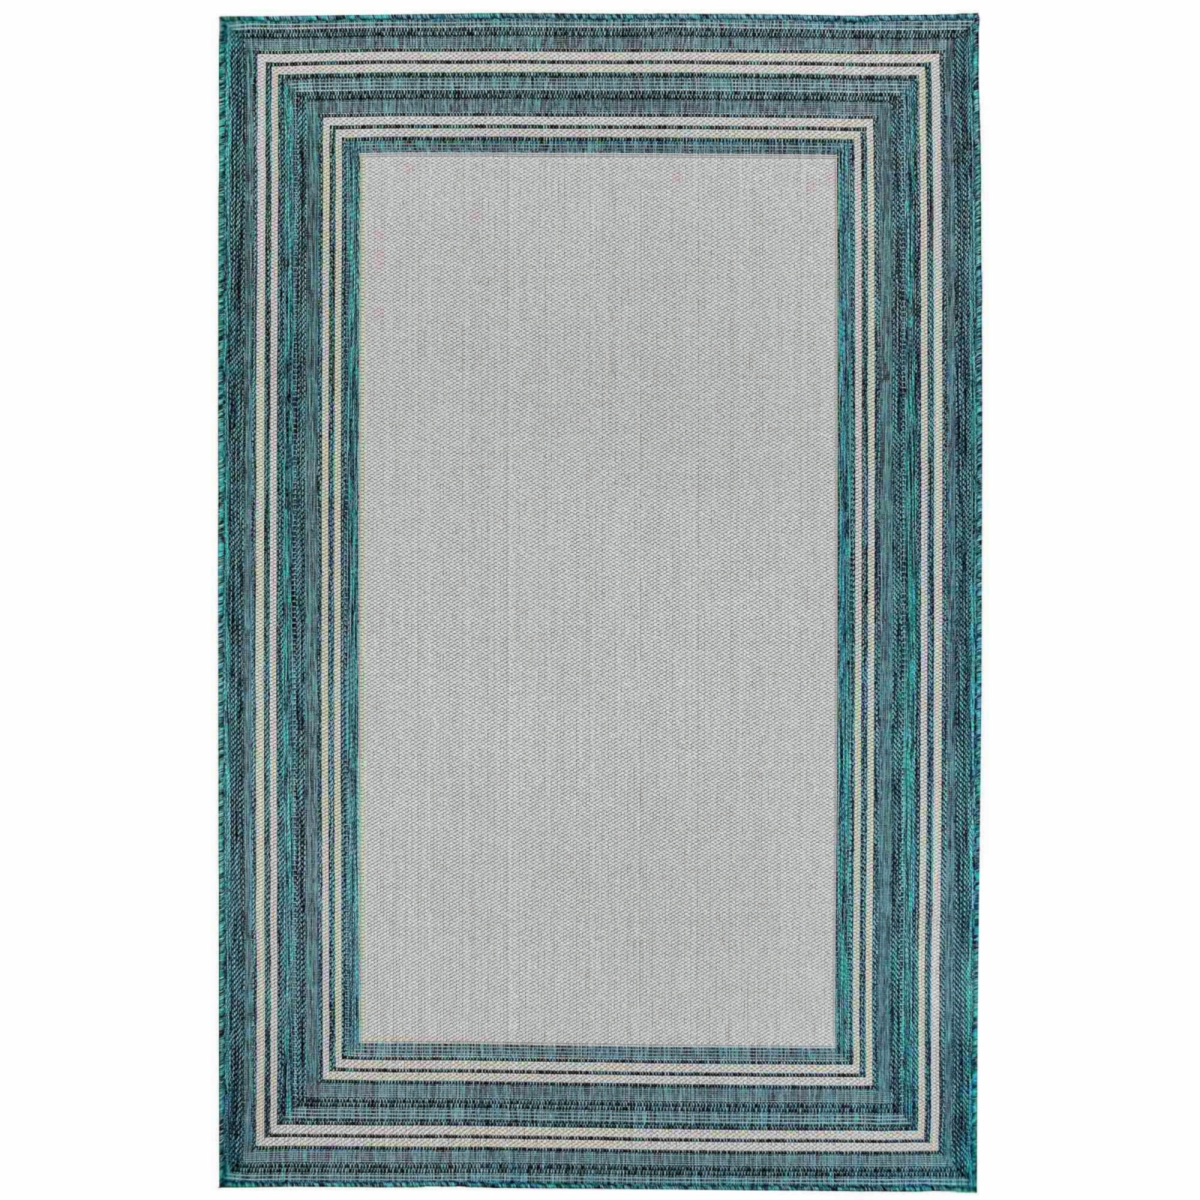 Trans-ocean Imports Cre45842594 39 In. X 59 In. Liora Manne Carmel Multi Border Indoor & Outdoor Wilton Woven Rectangle Rug - Teal